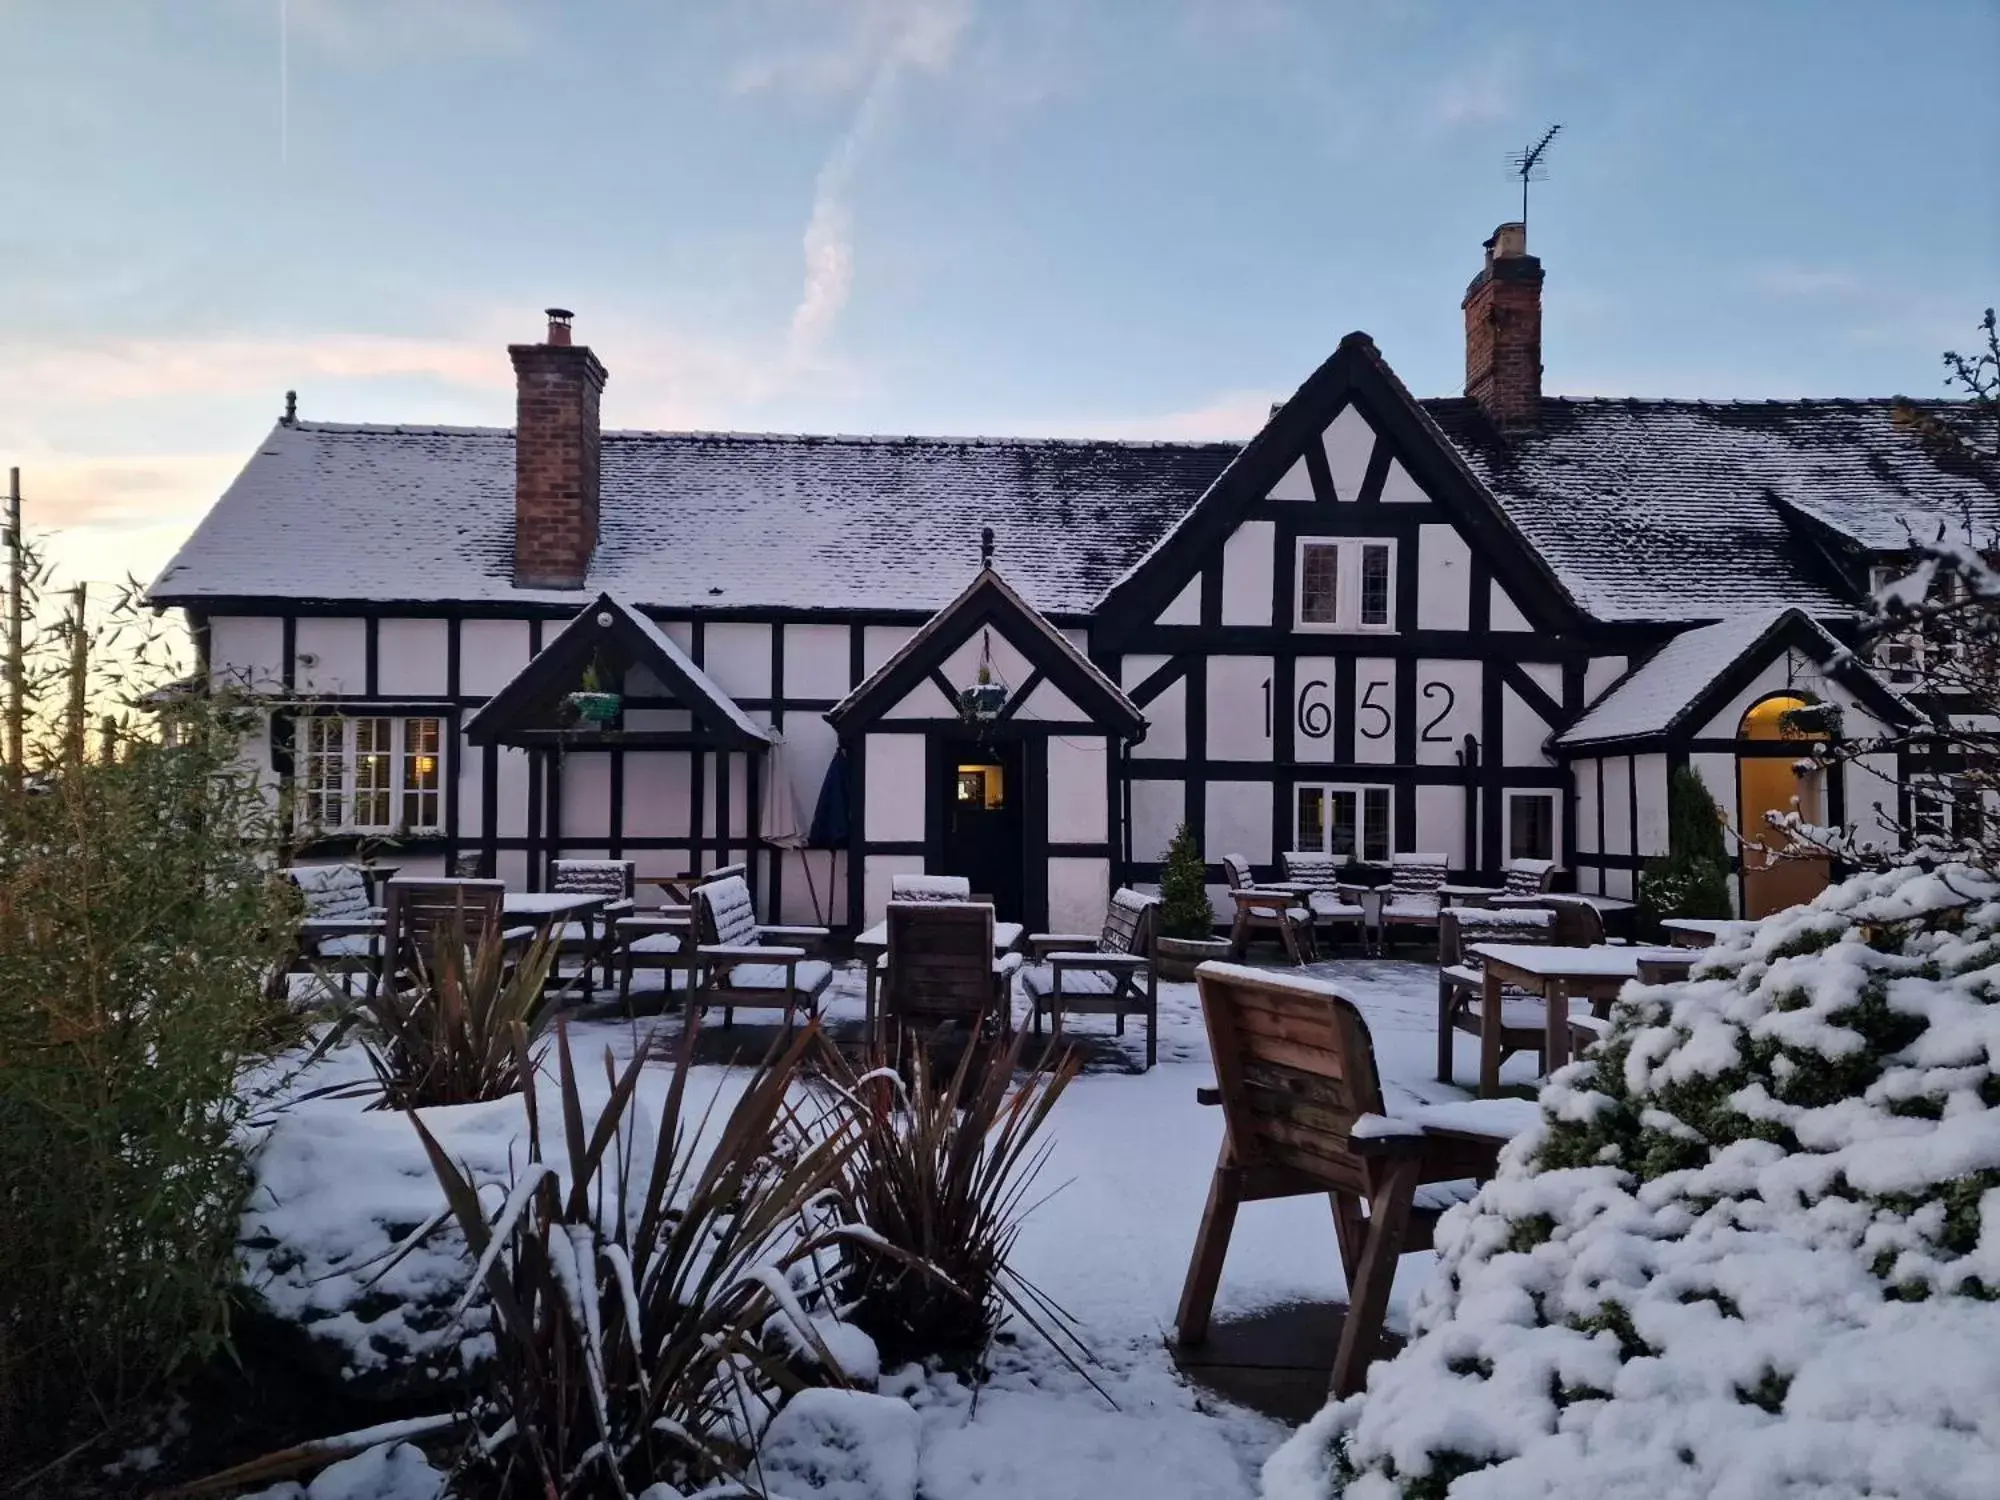 Property building, Winter in White Lion Hotel